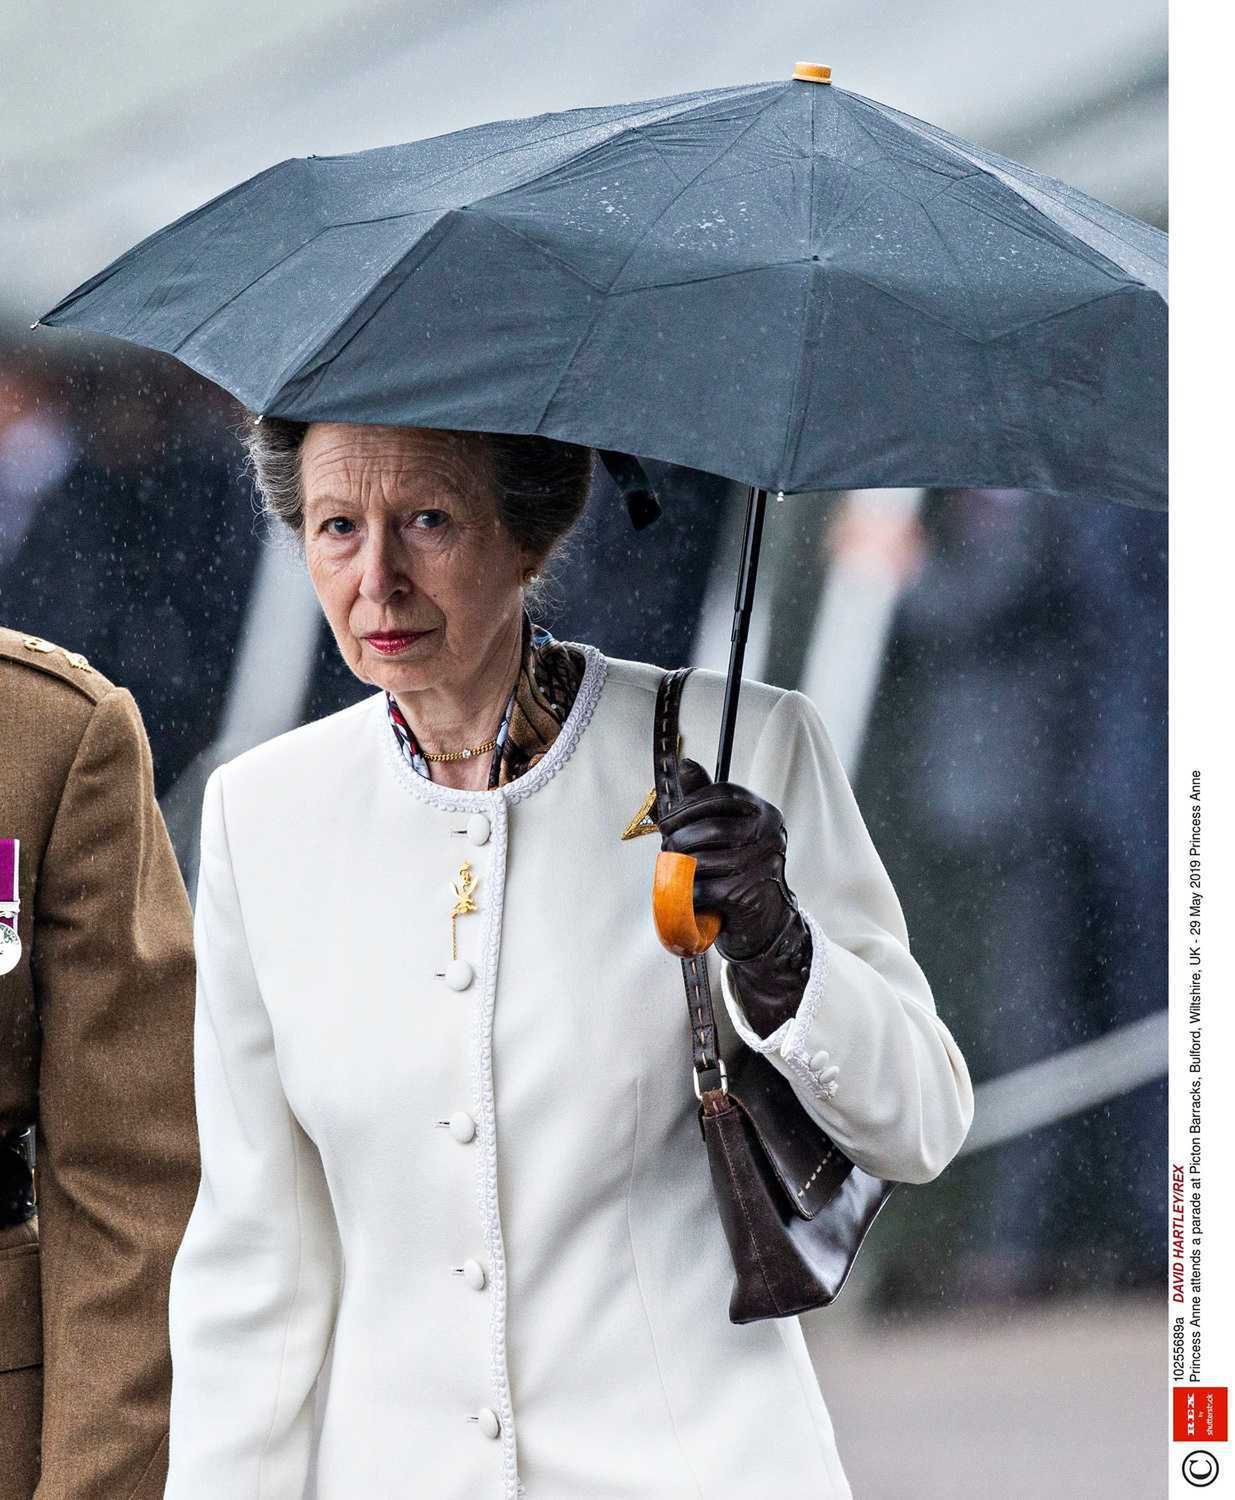 Mandatory Credit: Photo by DAVID HARTLEY/REX (10255689a)  Princess Anne  Princess Anne attends a parade at Picton Barracks, Bulford, Wiltshire, UK - 29 May 2019